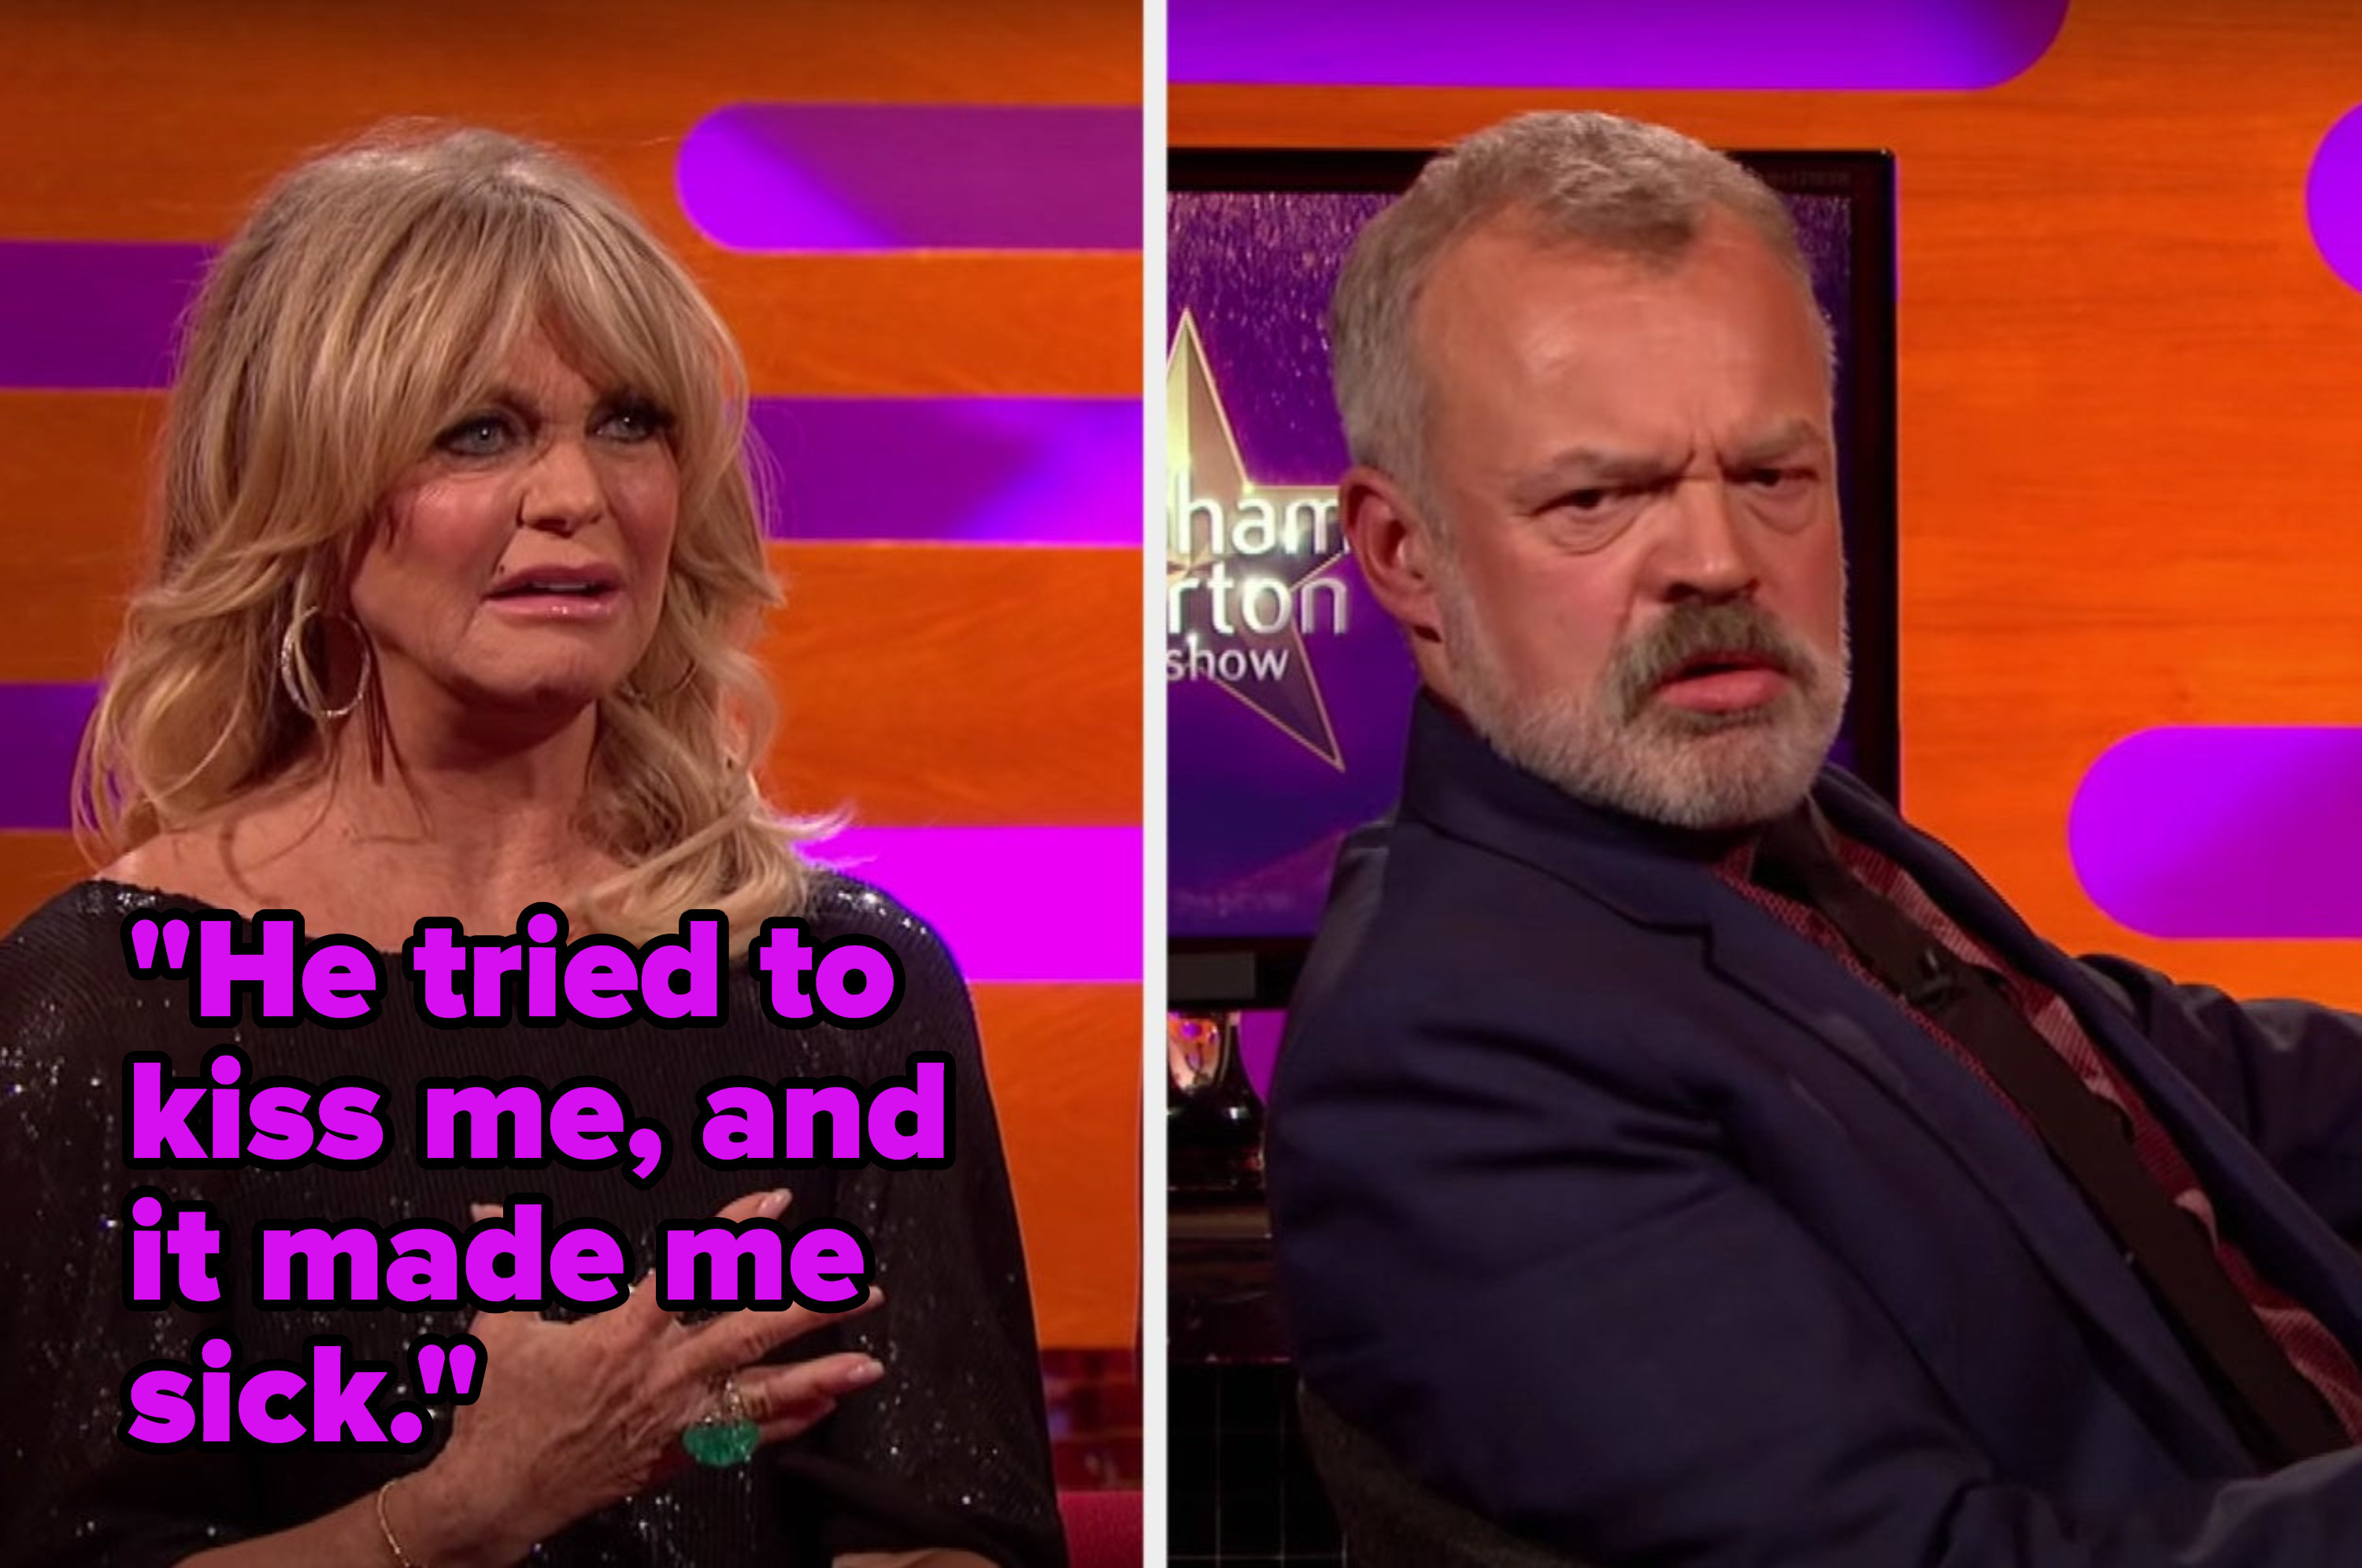 Goldie Hawn talks about how a date of hers once made her vomit